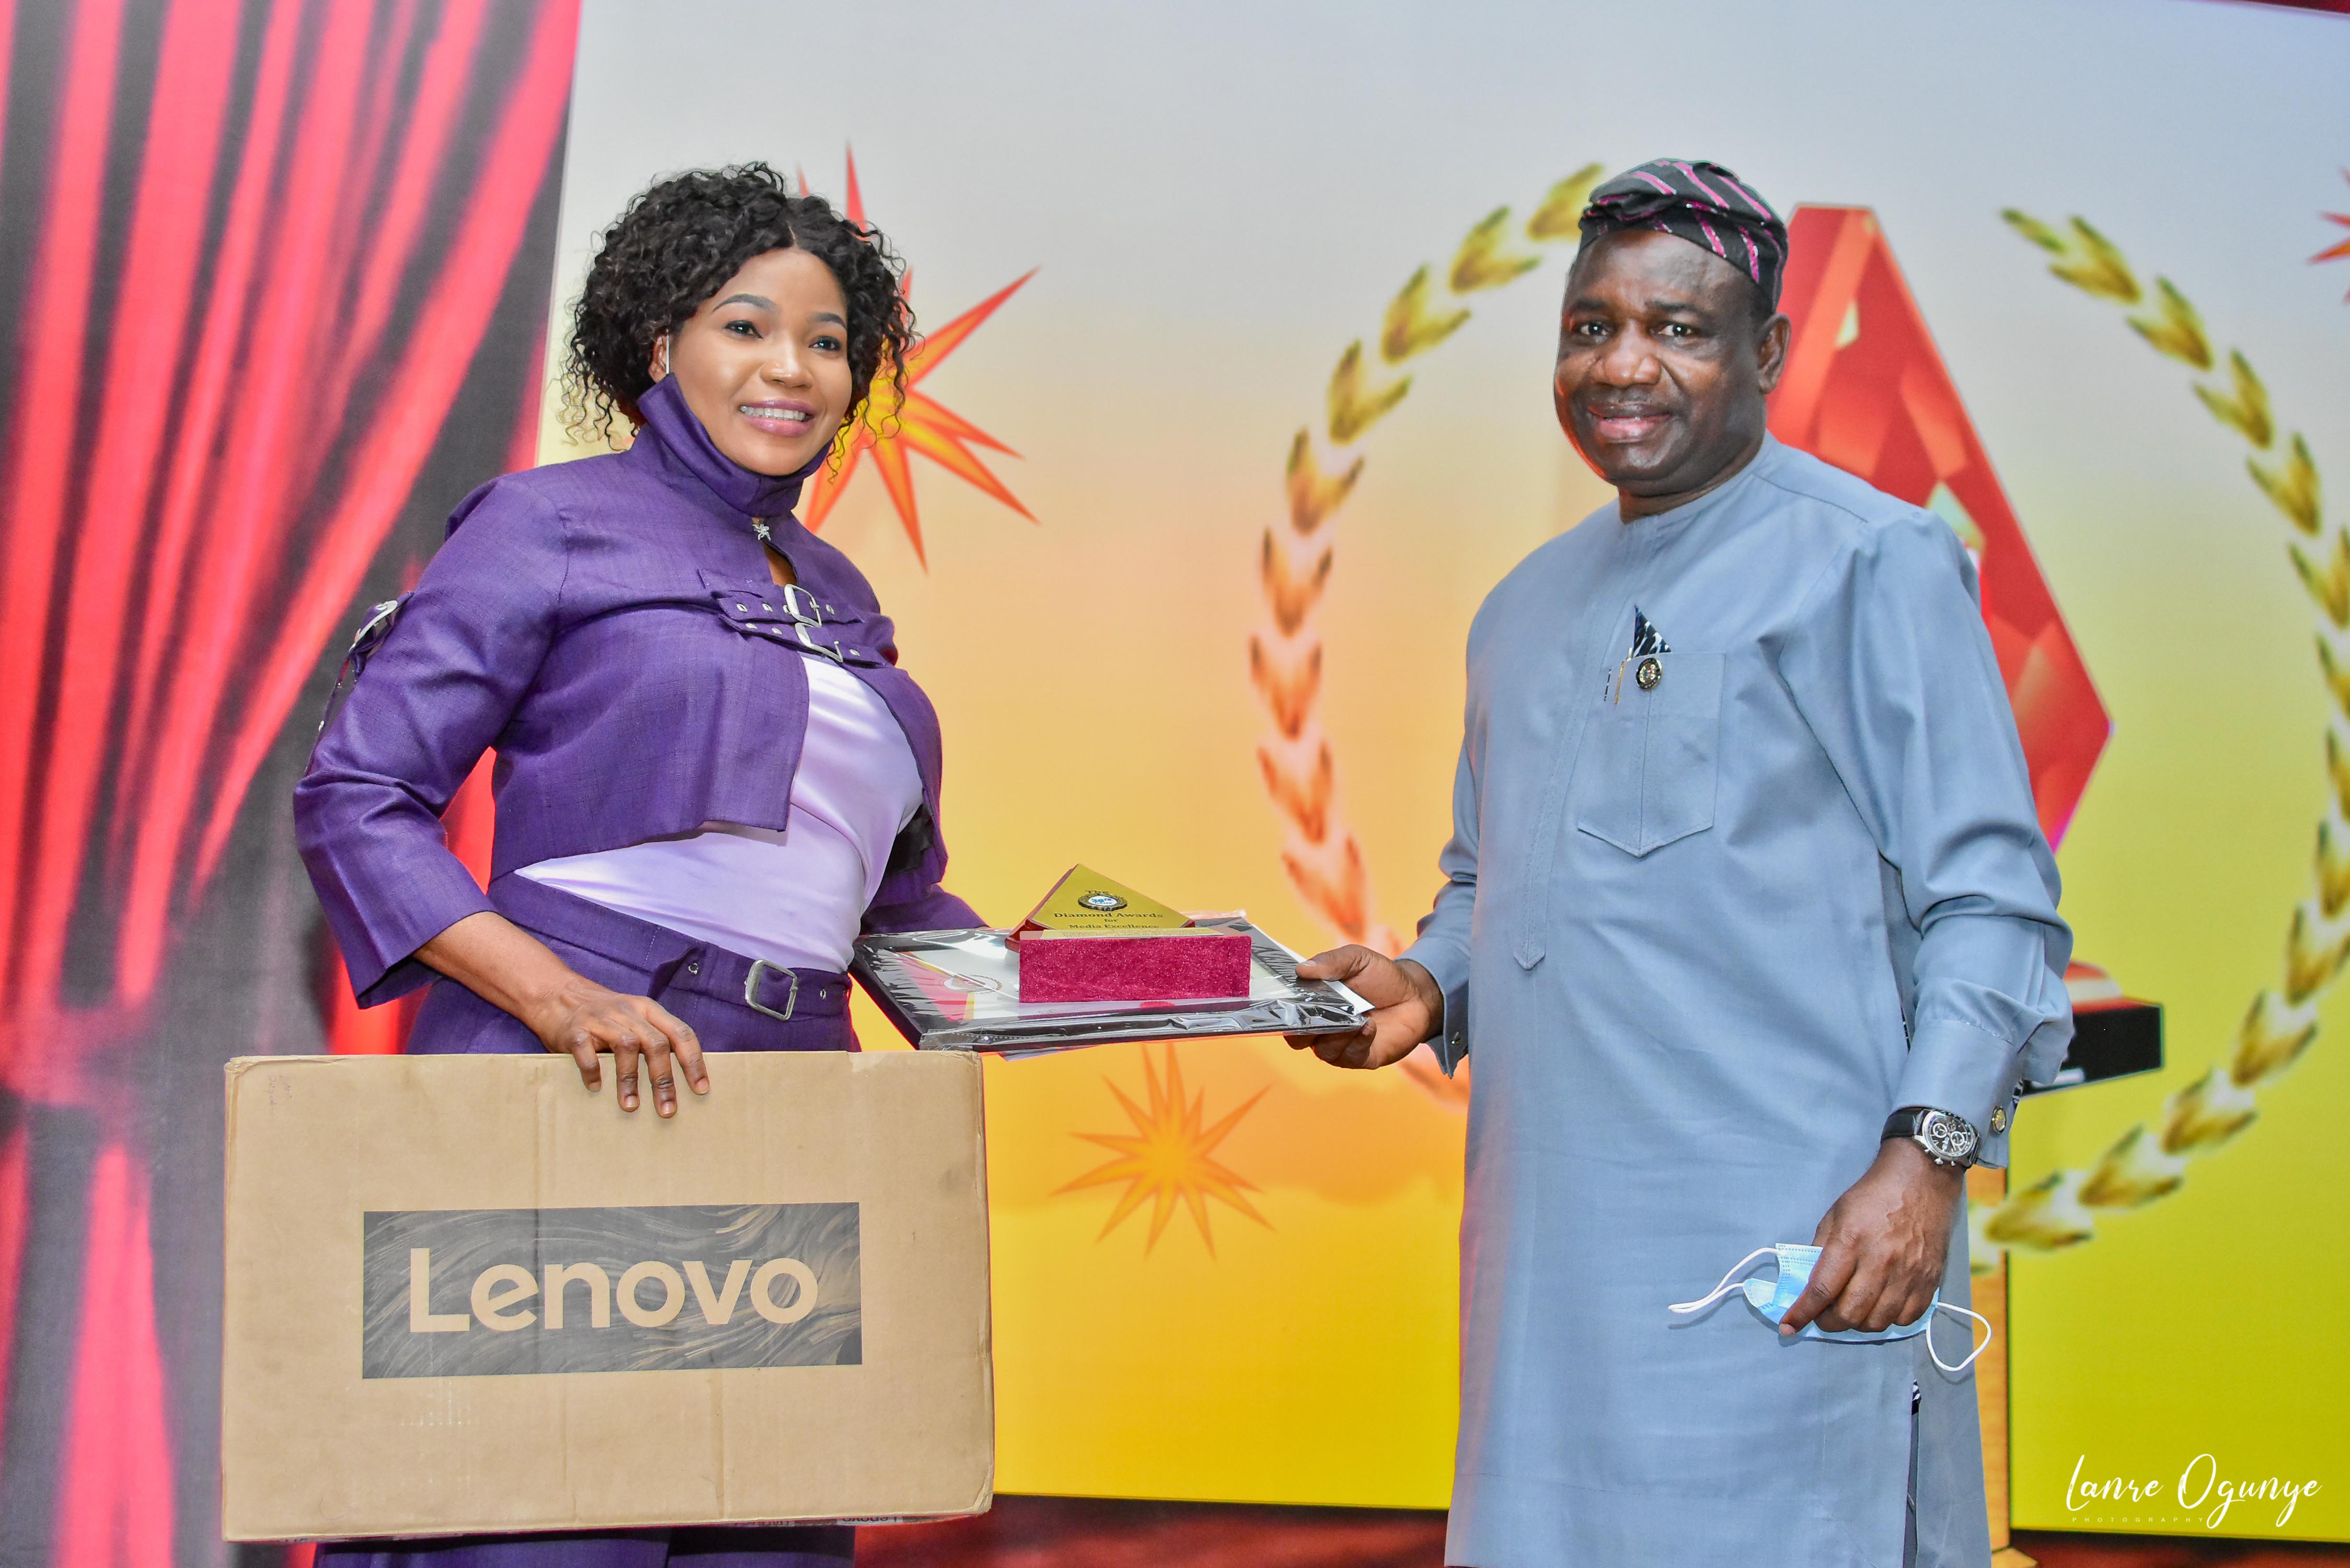 <span  class="uc_style_uc_tiles_grid_image_elementor_uc_items_attribute_title" style="color:#ffffff;">Lagos Reporting Adedoja Salam Adeniyi receiving her prize from Gbenga Omotoso</span>